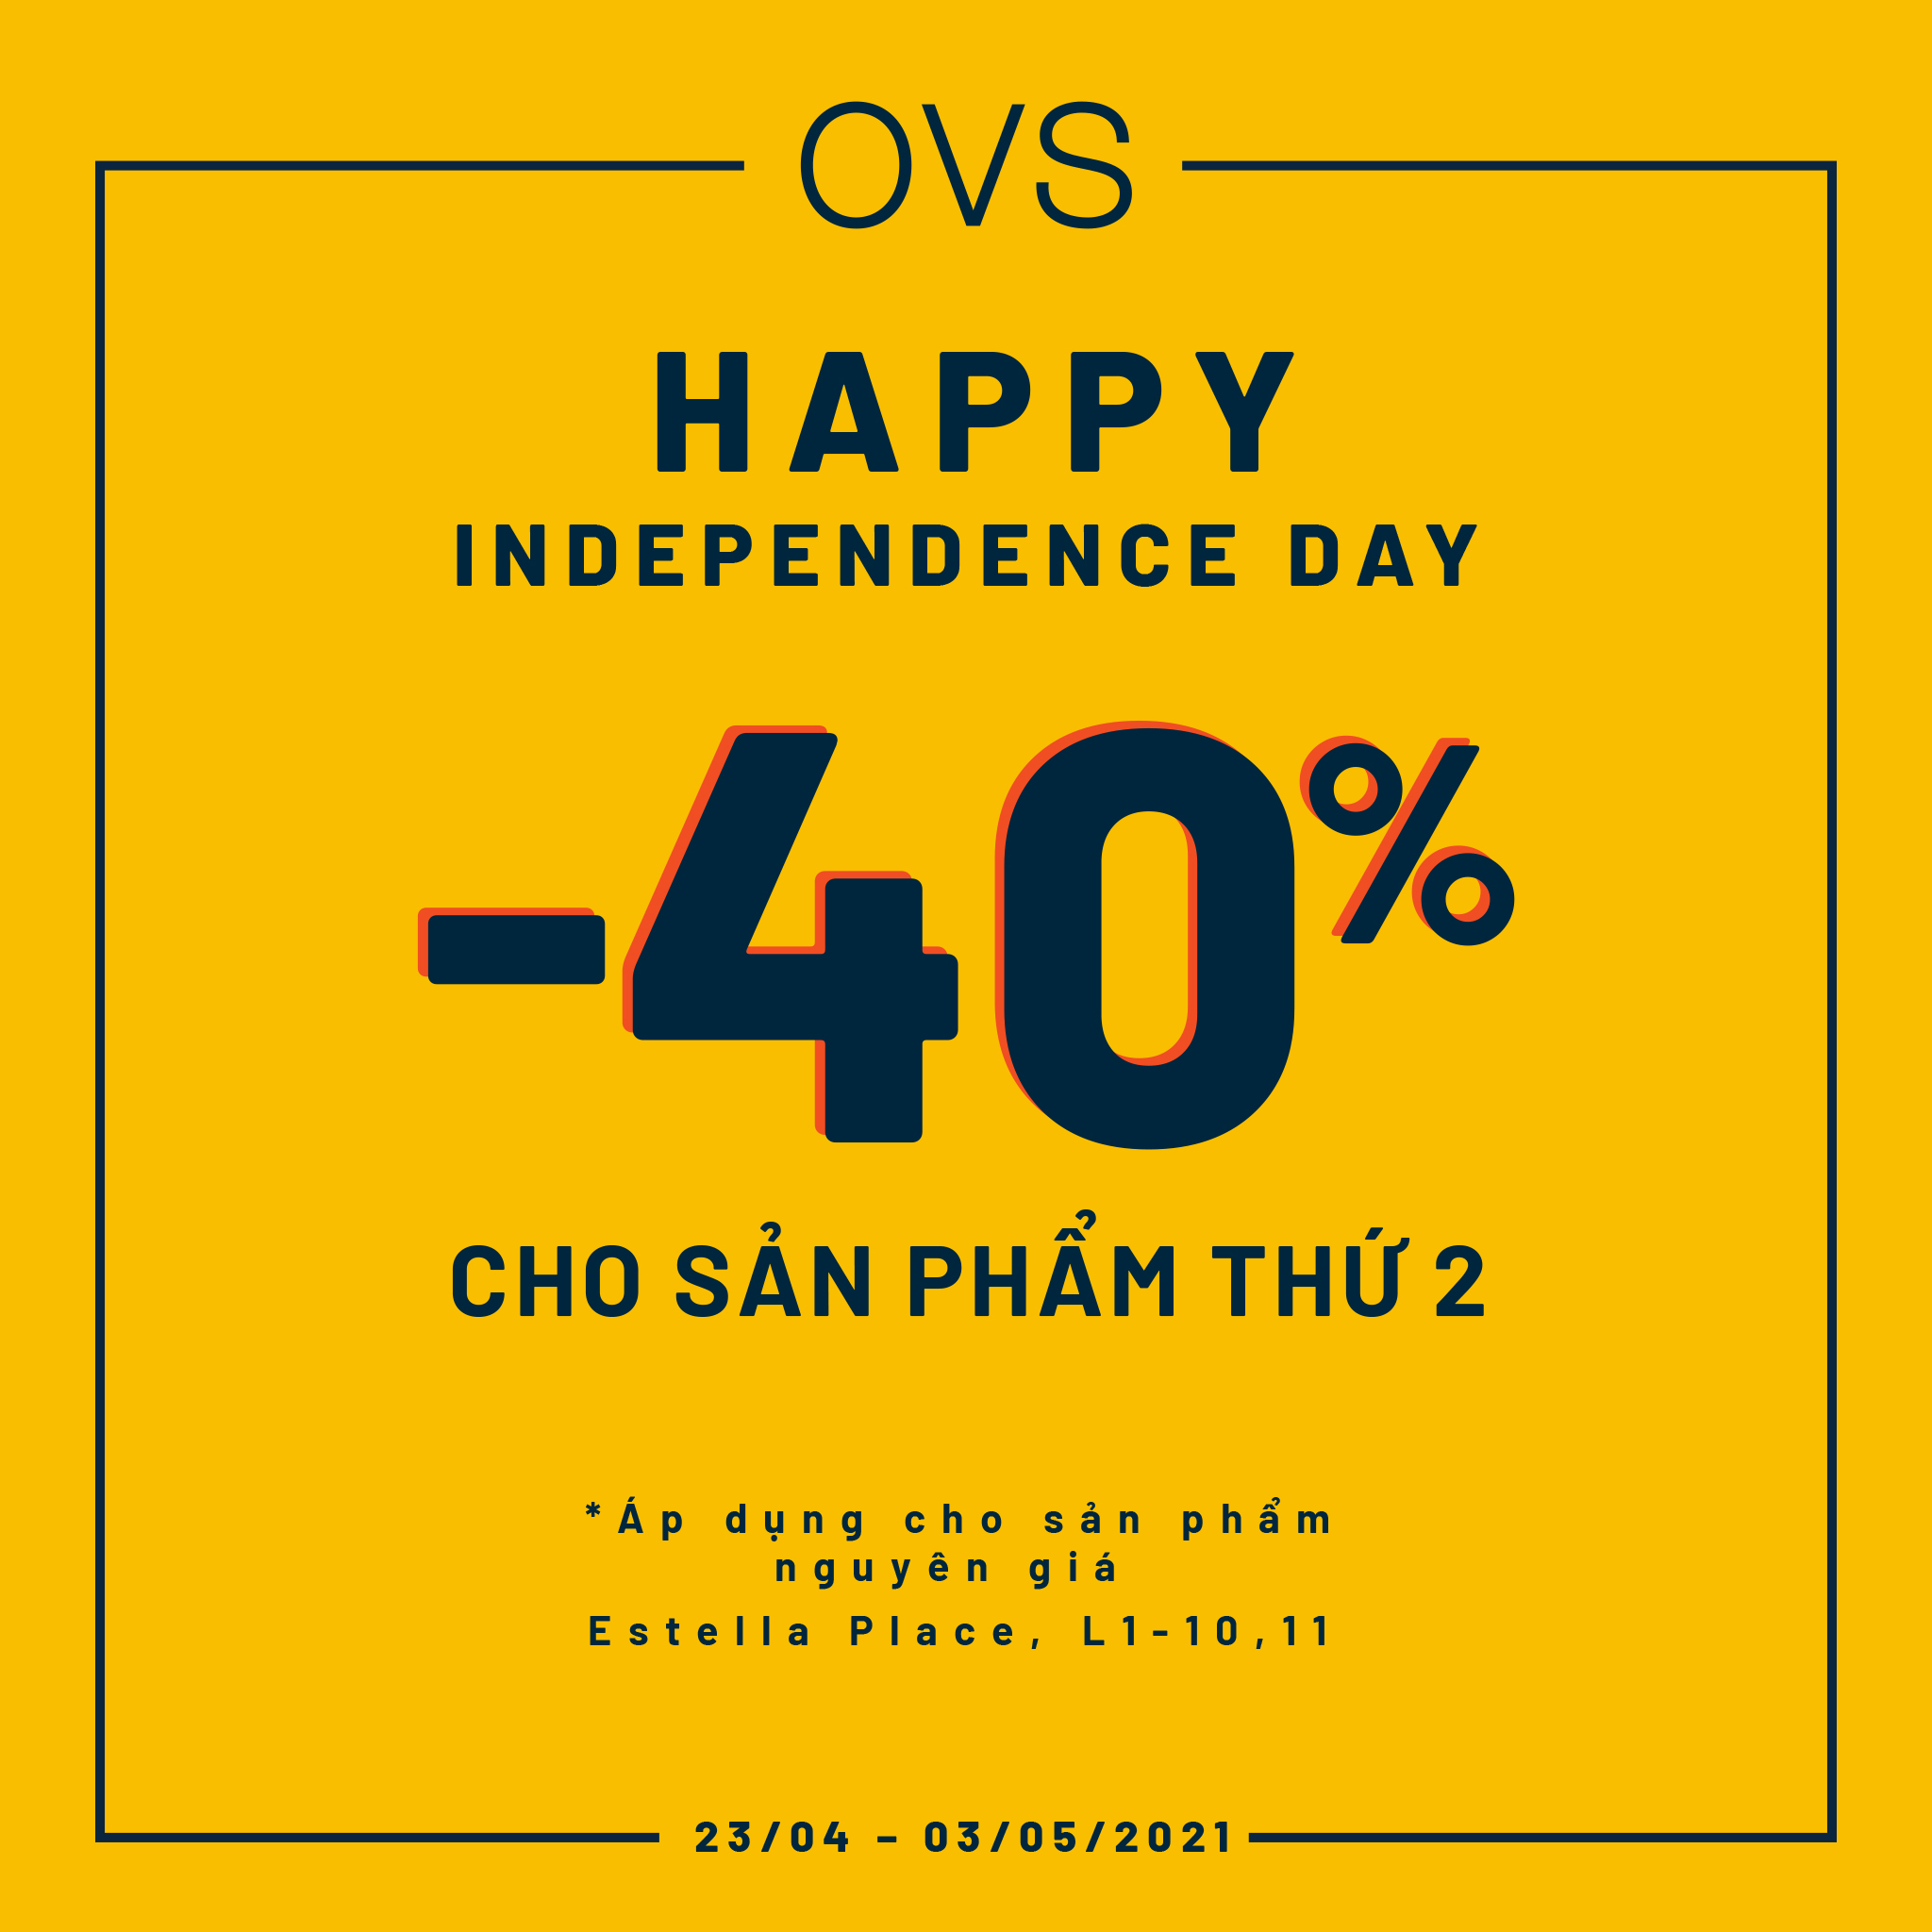 🎊 HAPPY INDEPENDANCE DAY - 40% OFF FOR THE 2nd ITEM